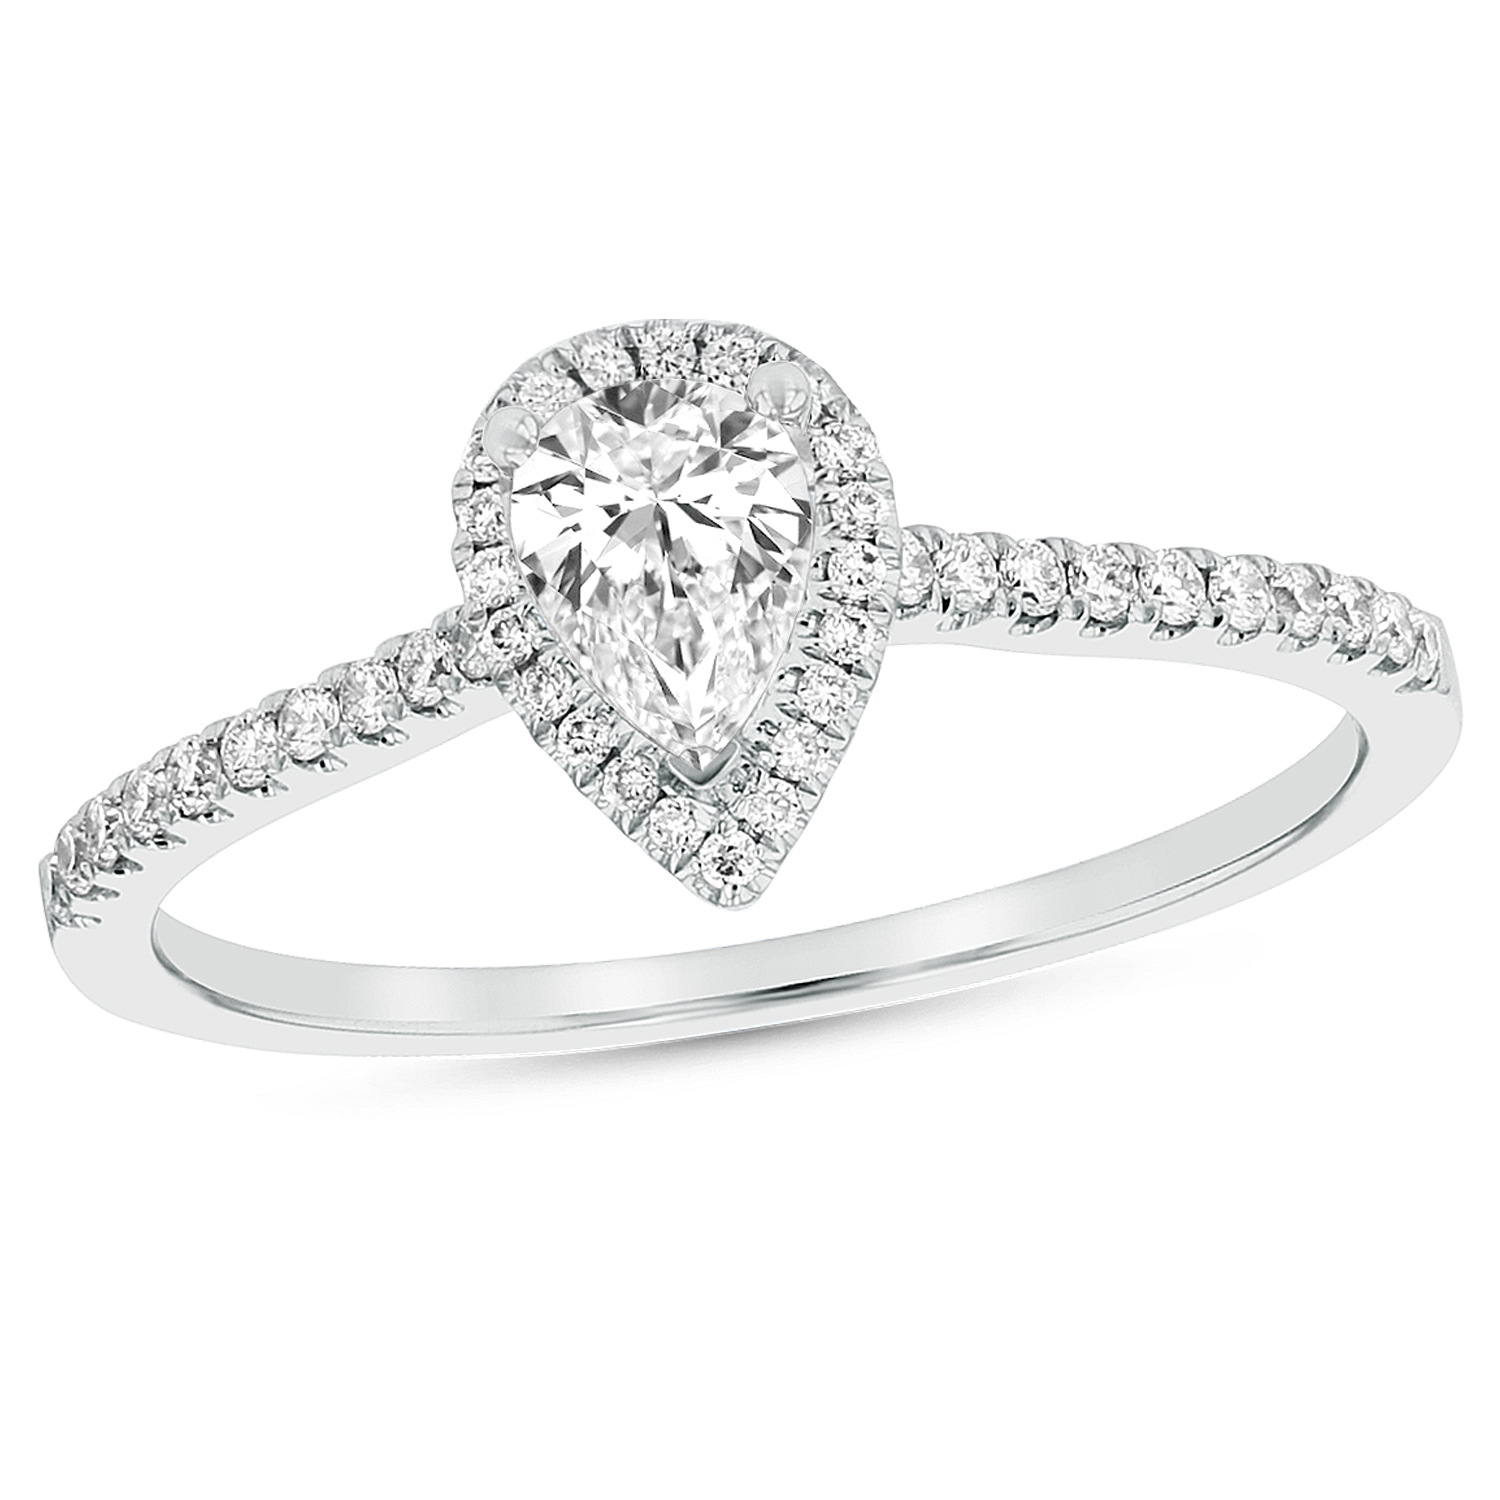 View 0.59ctw Diamond Engagement Ring in 18k White Gold